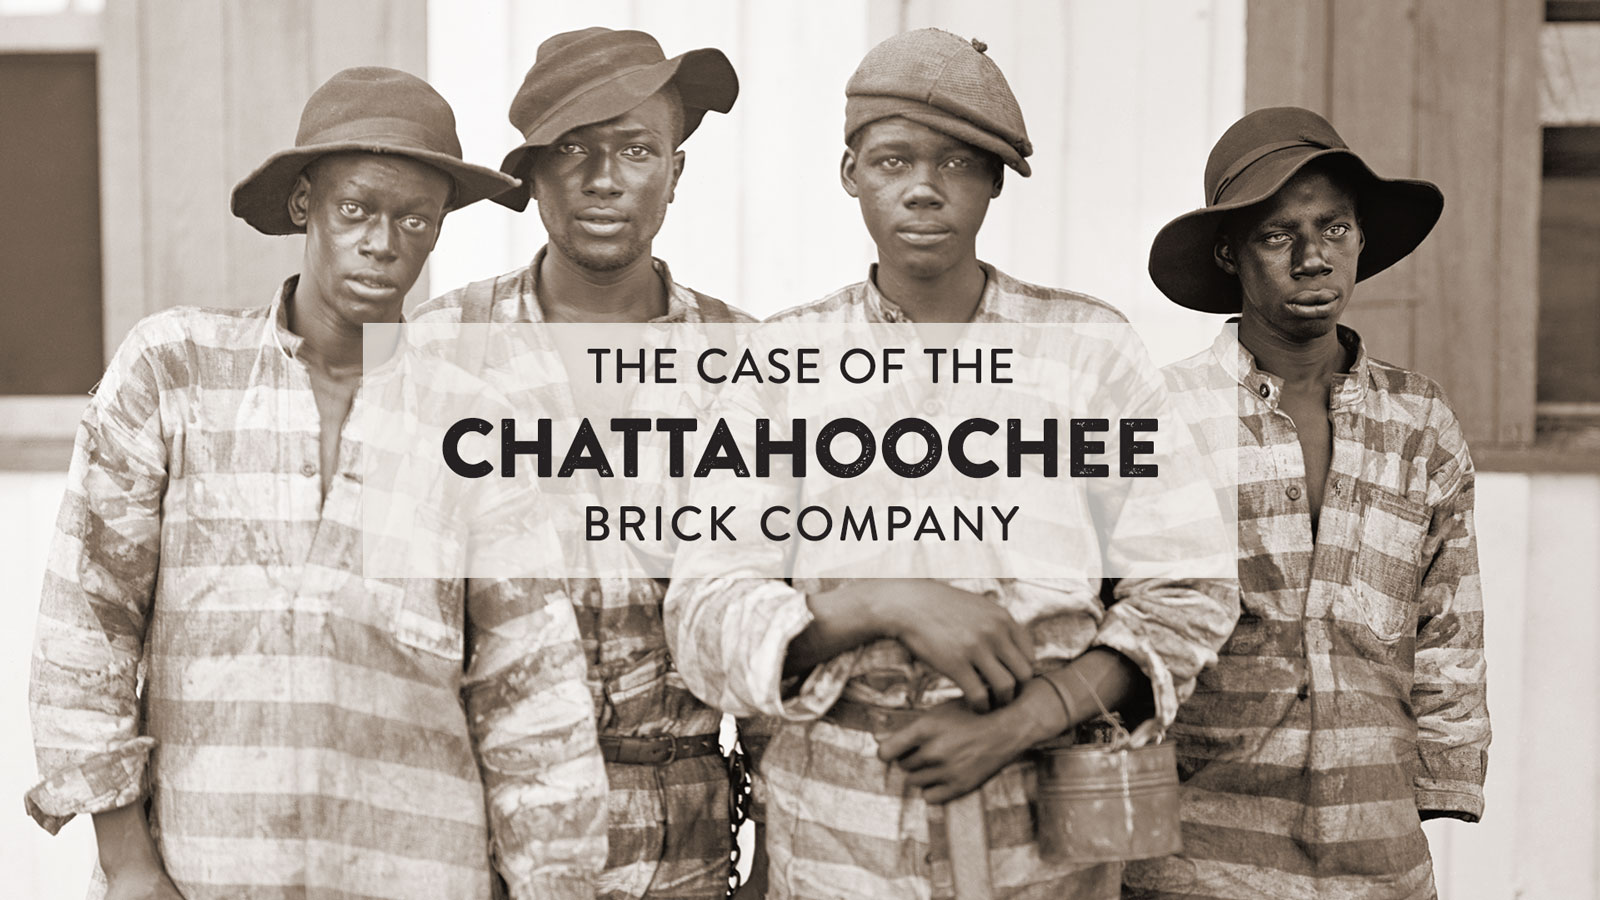 Convict Leasing, Forced Labor, Theft of Black Wealth: The Case of the Chattahoochee Brick Company